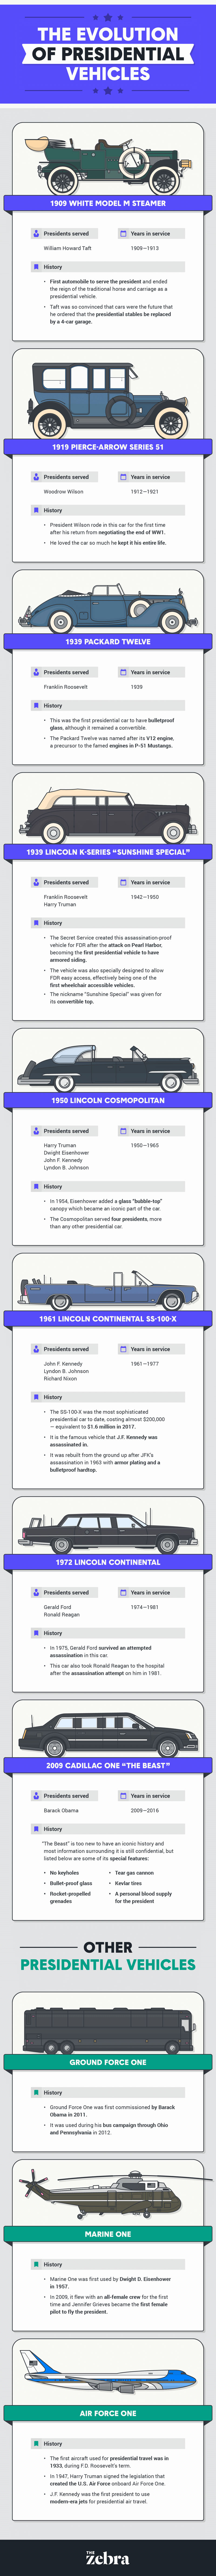 The Evolution of the Presidential Car